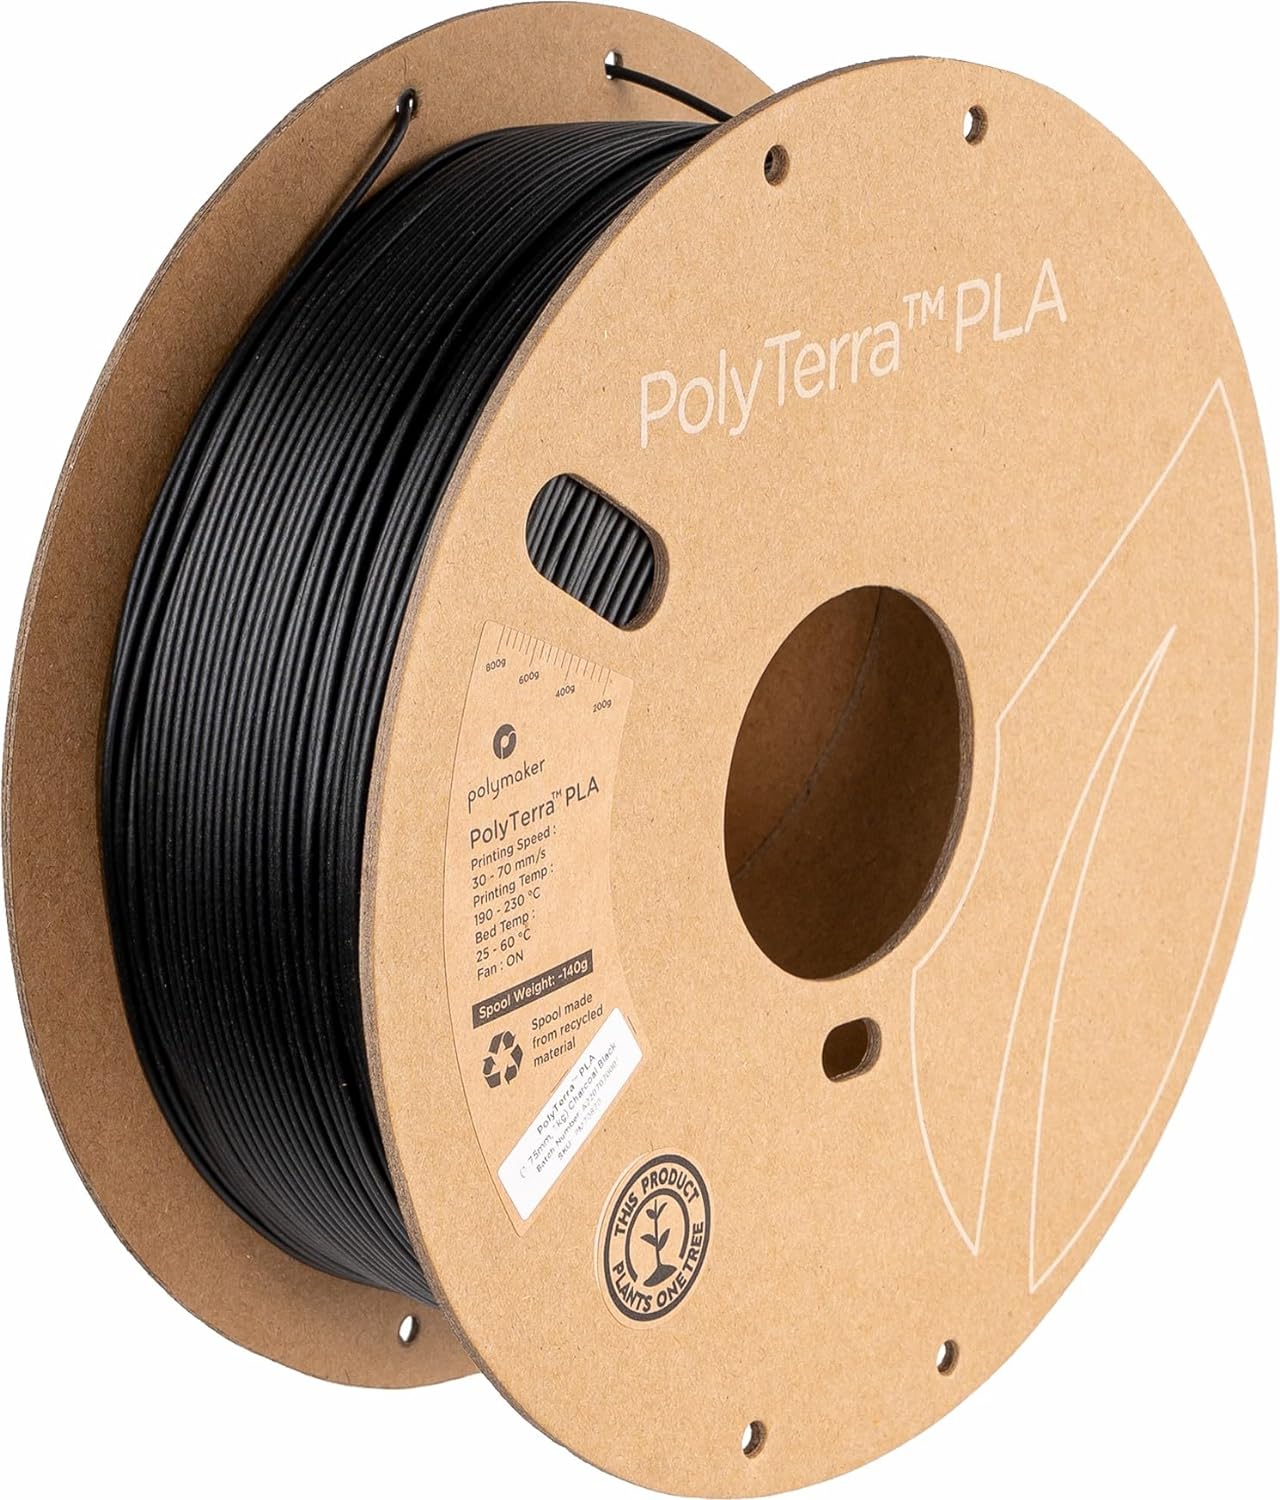 PolyTerra PLa | Best Cheap PLA Filament from Amazon: What to buy?